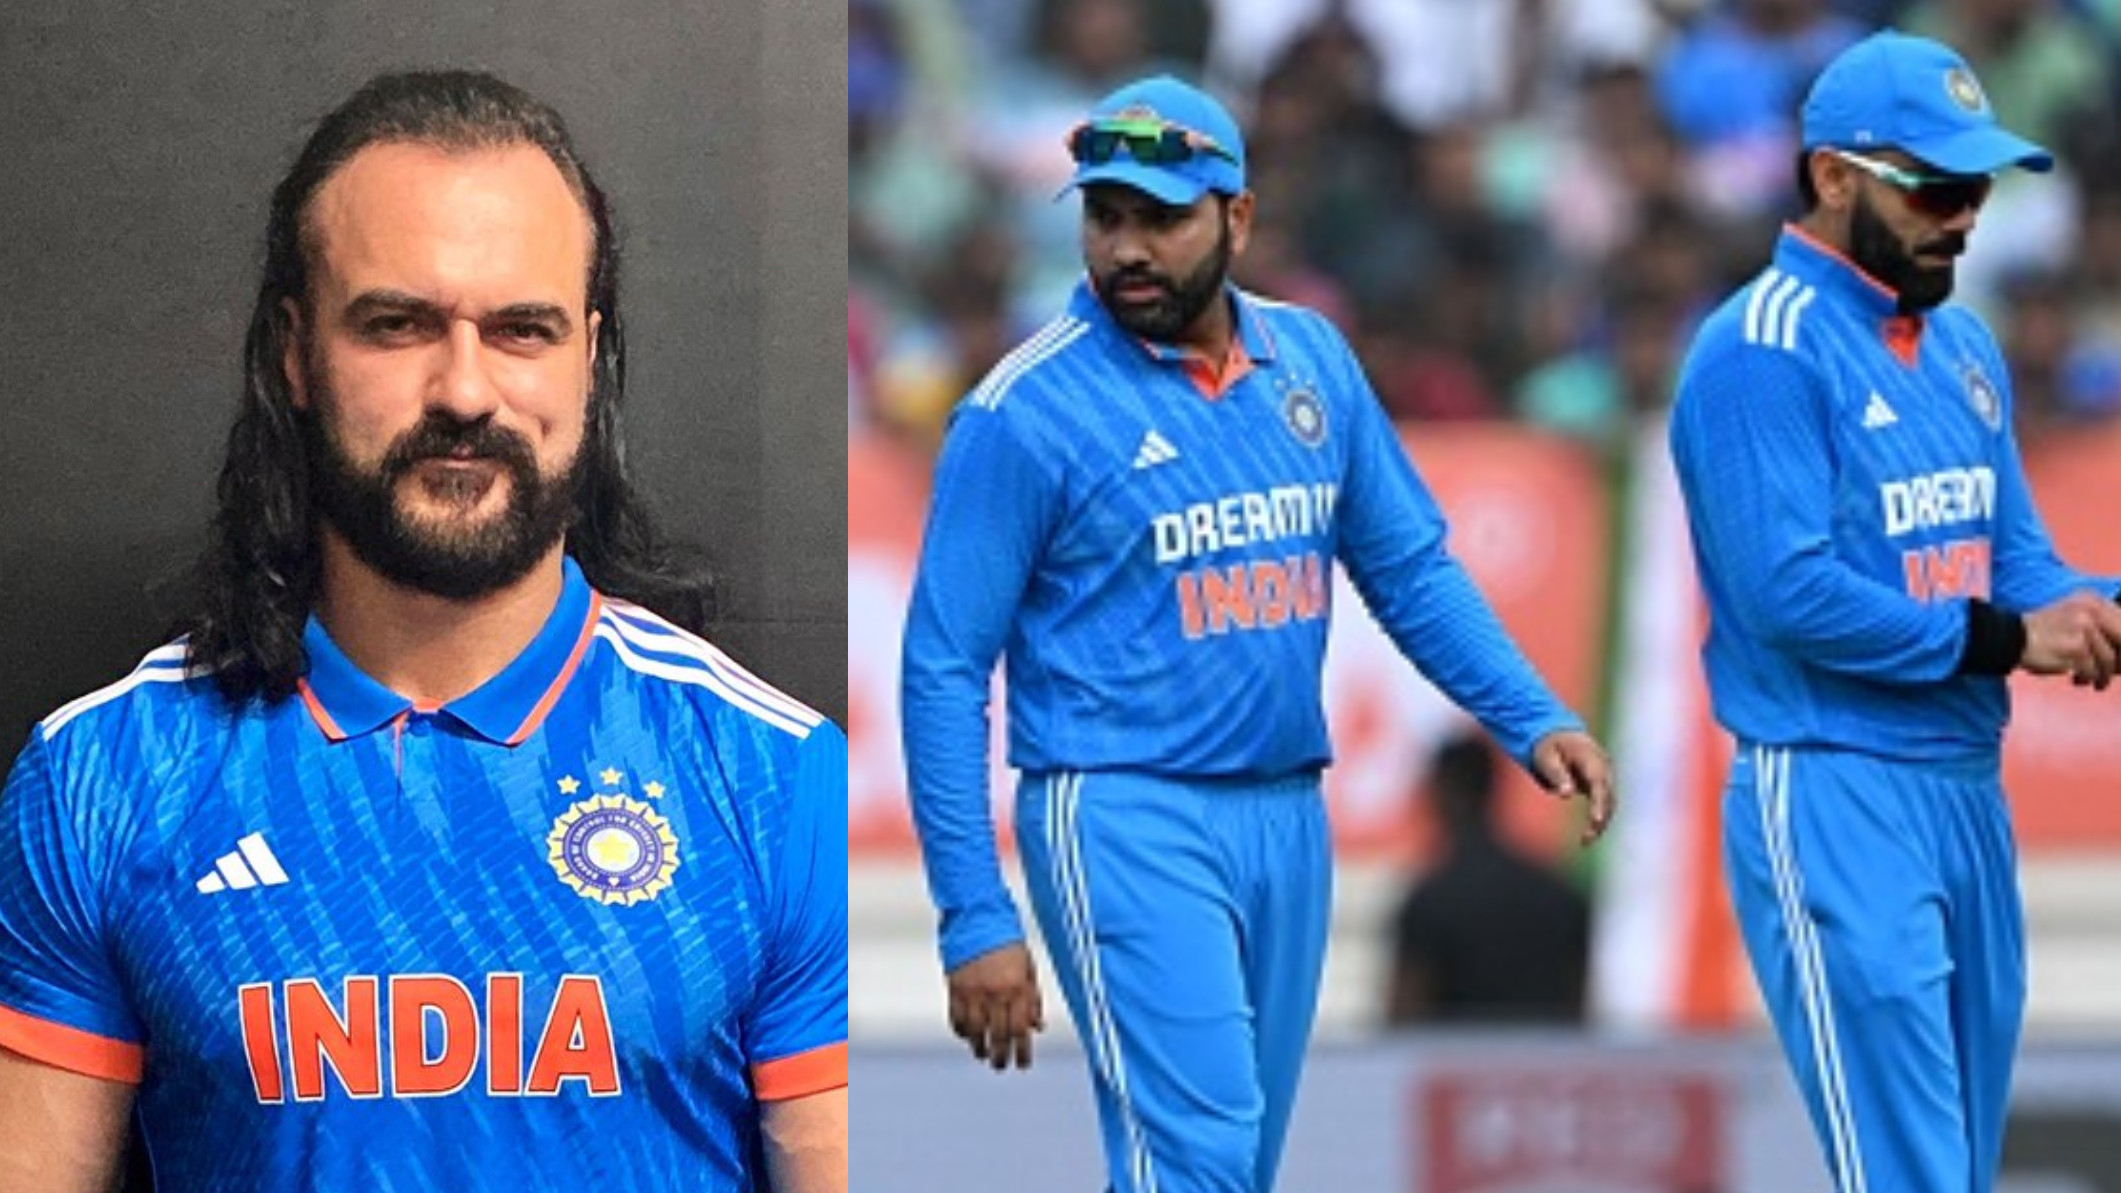 CWC 2023: WWE superstar Drew McIntyre sends wishes to Rohit Sharma and Team India for World Cup